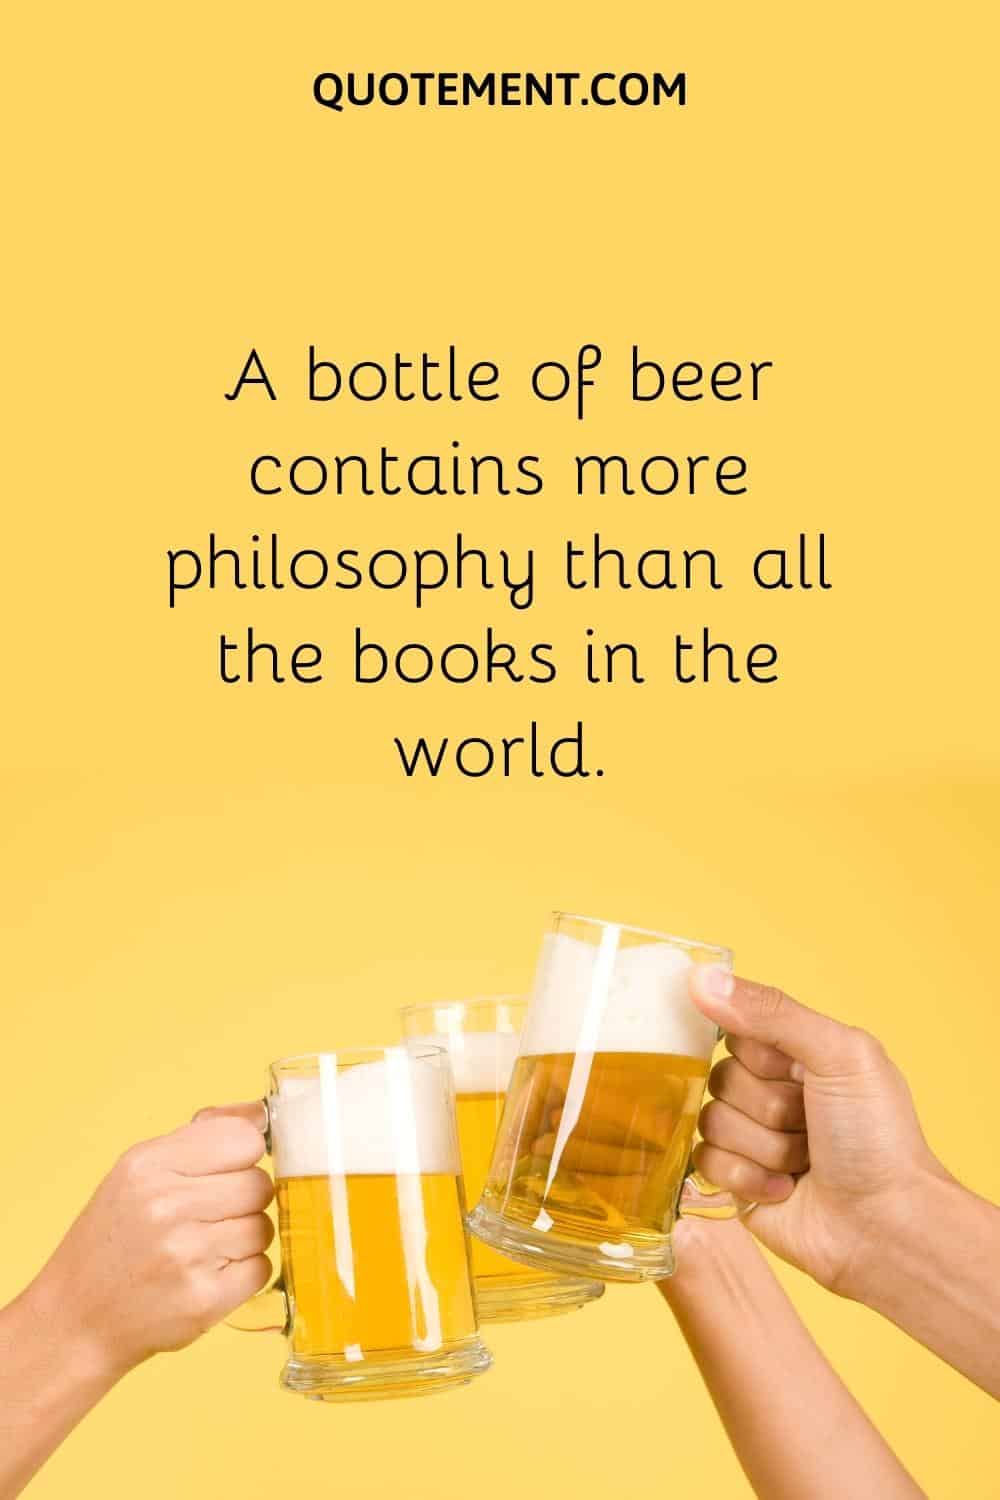 A bottle of beer contains more philosophy than all the books in the world.